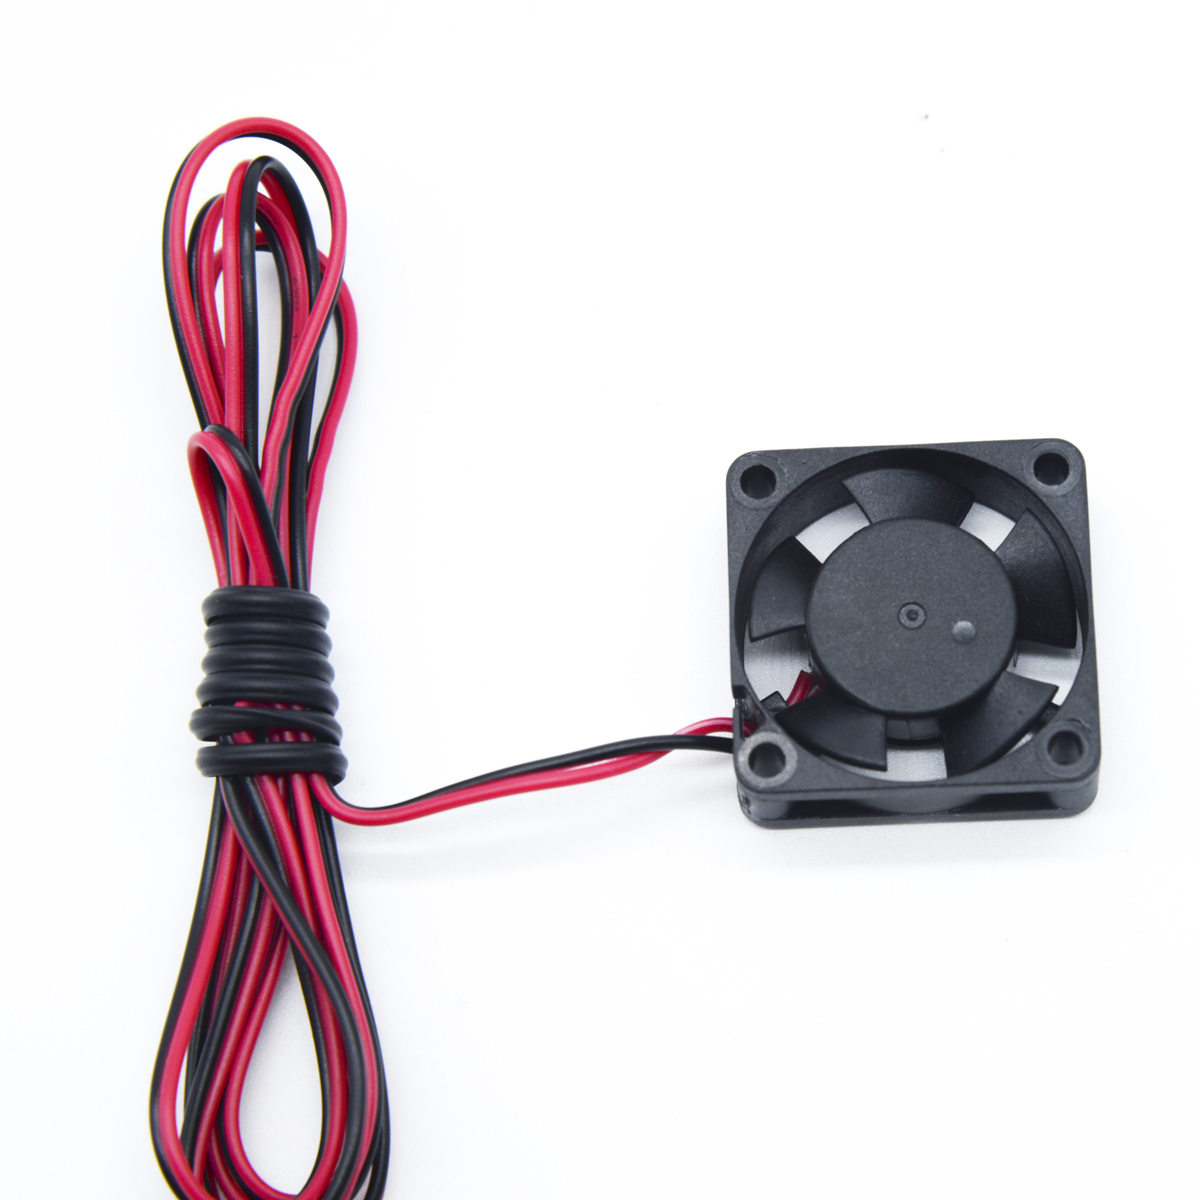 TEVO® 3D Printer Part 12V DC 30*30*10mm Brushless 3010 Cooling Fan with 100mm Cable